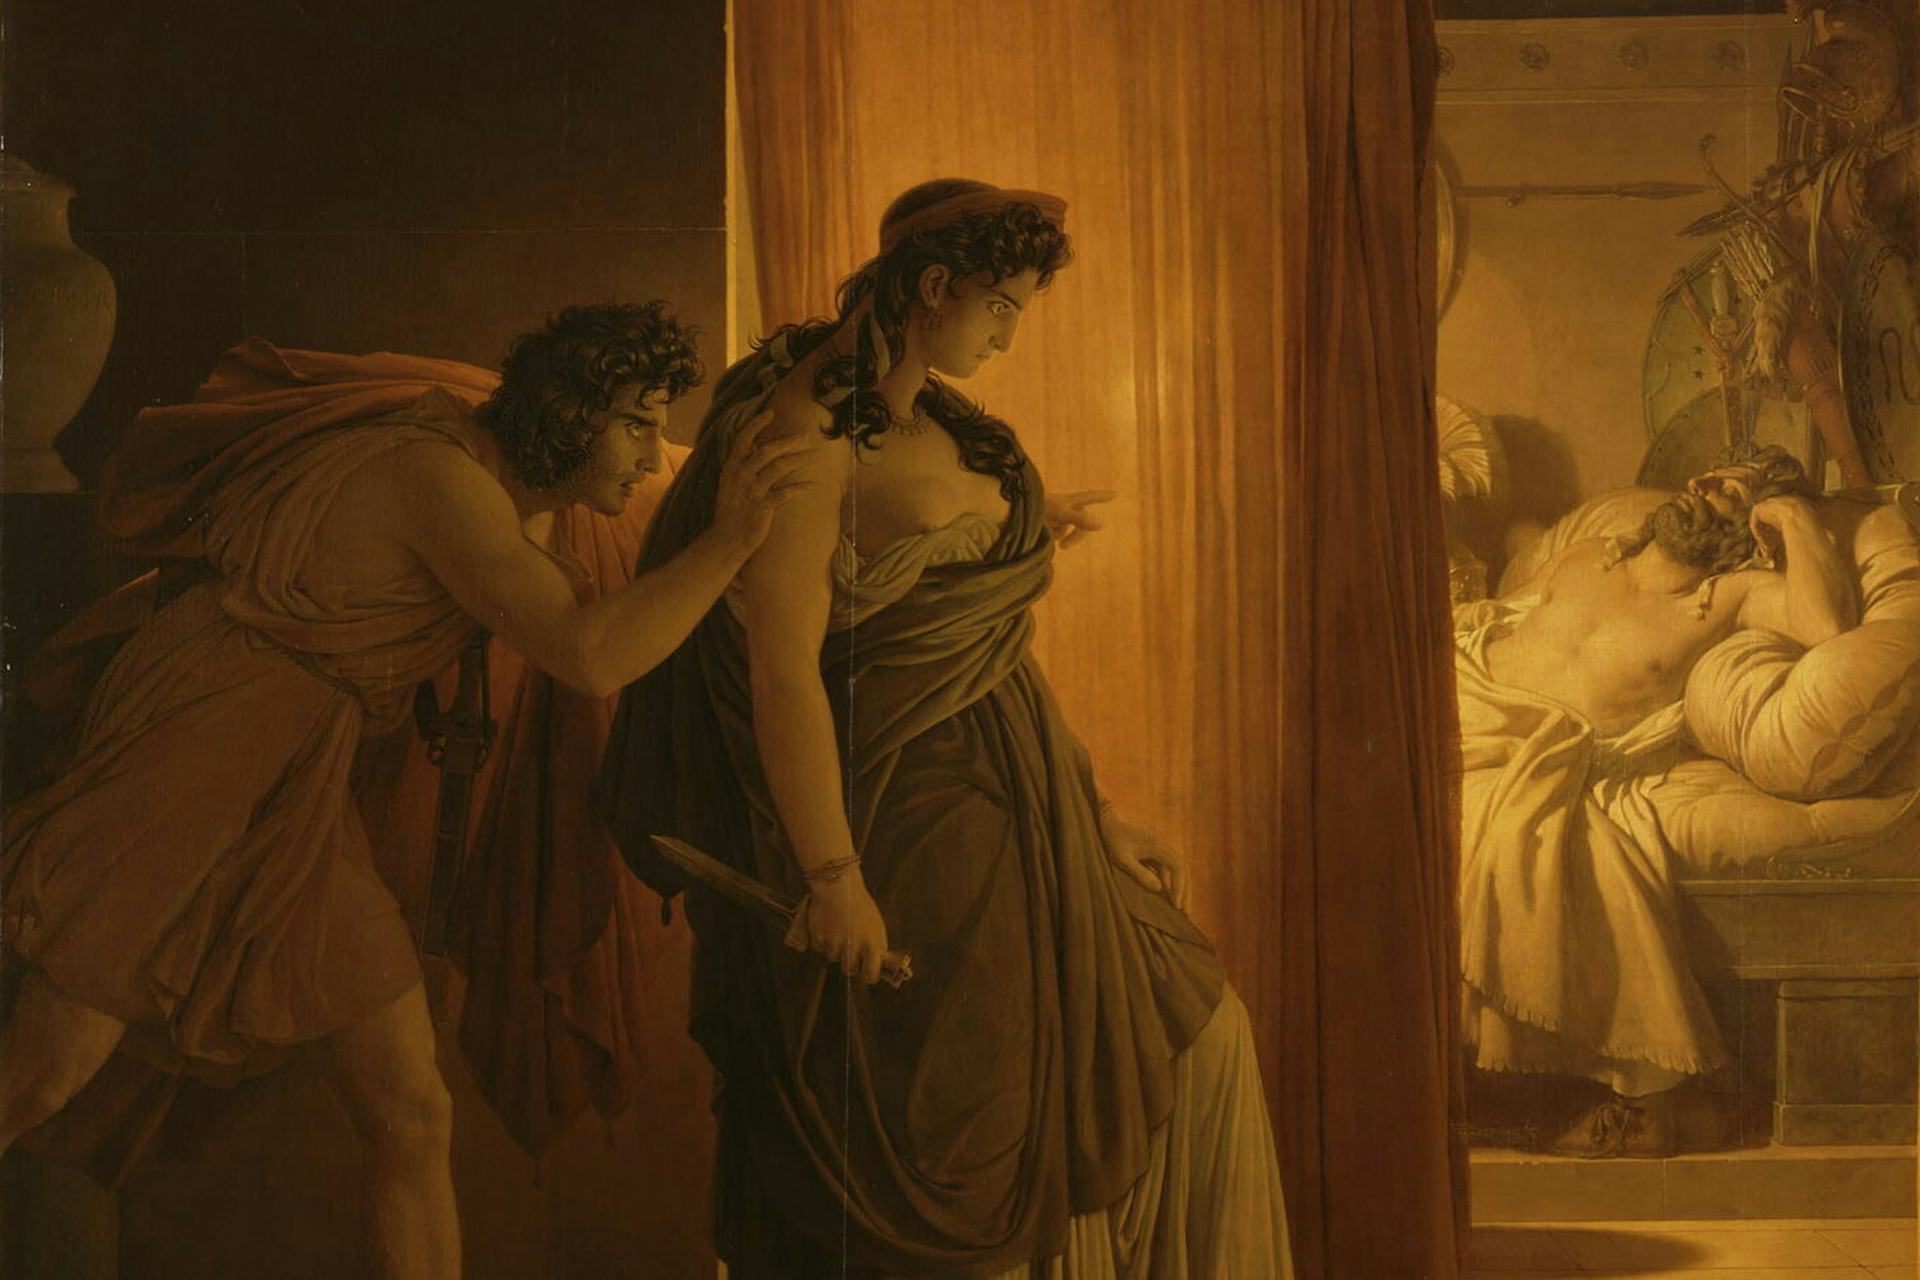 Clytemnestra Hesitates before Killing the Sleeping Agamemnon by Pierre-Narcisse Guérin